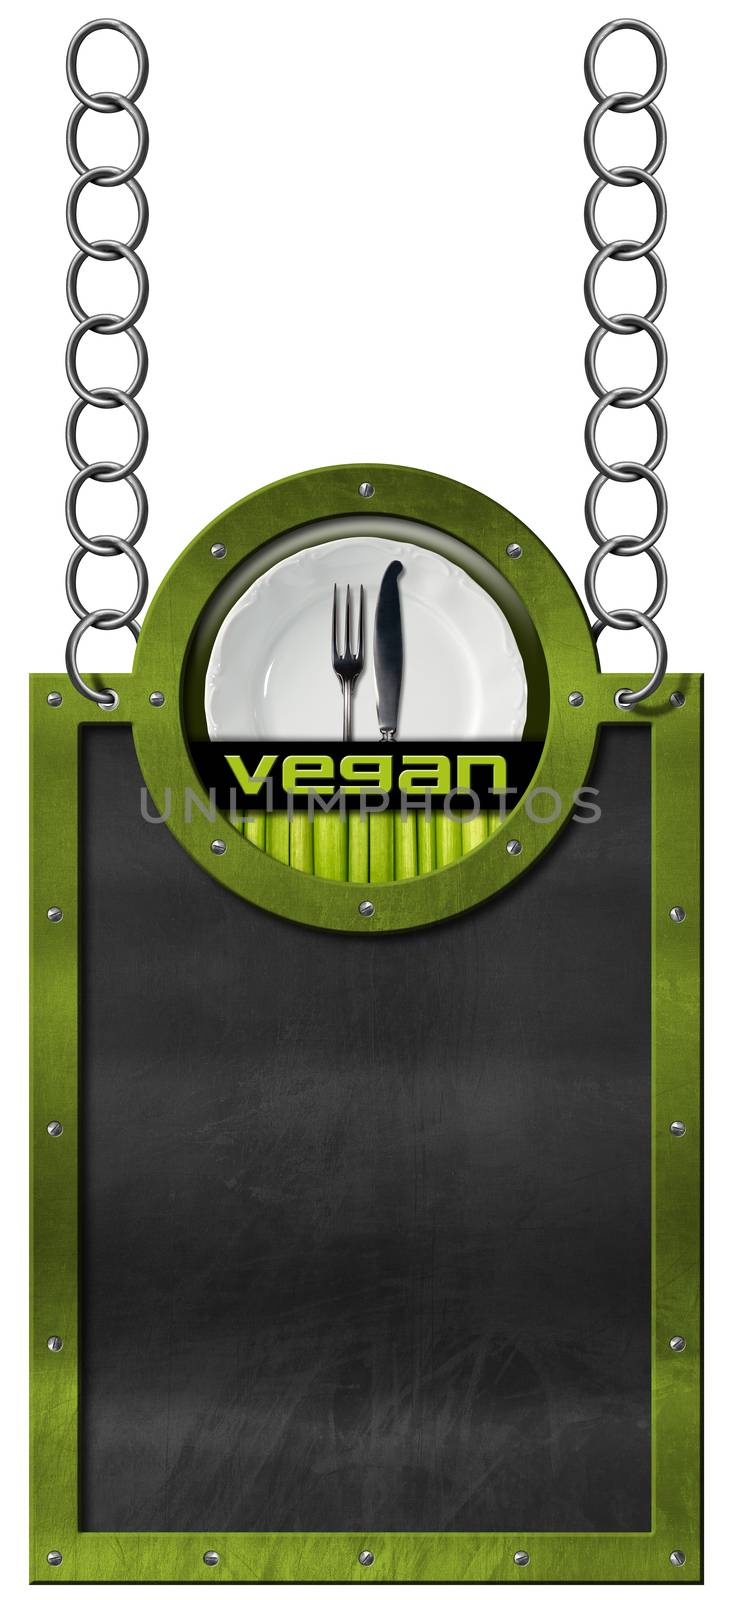 Empty blackboard with metal green frame hanging from a metal chain, vegan symbol with empty white plate and silver cutlery. Isolated on white background